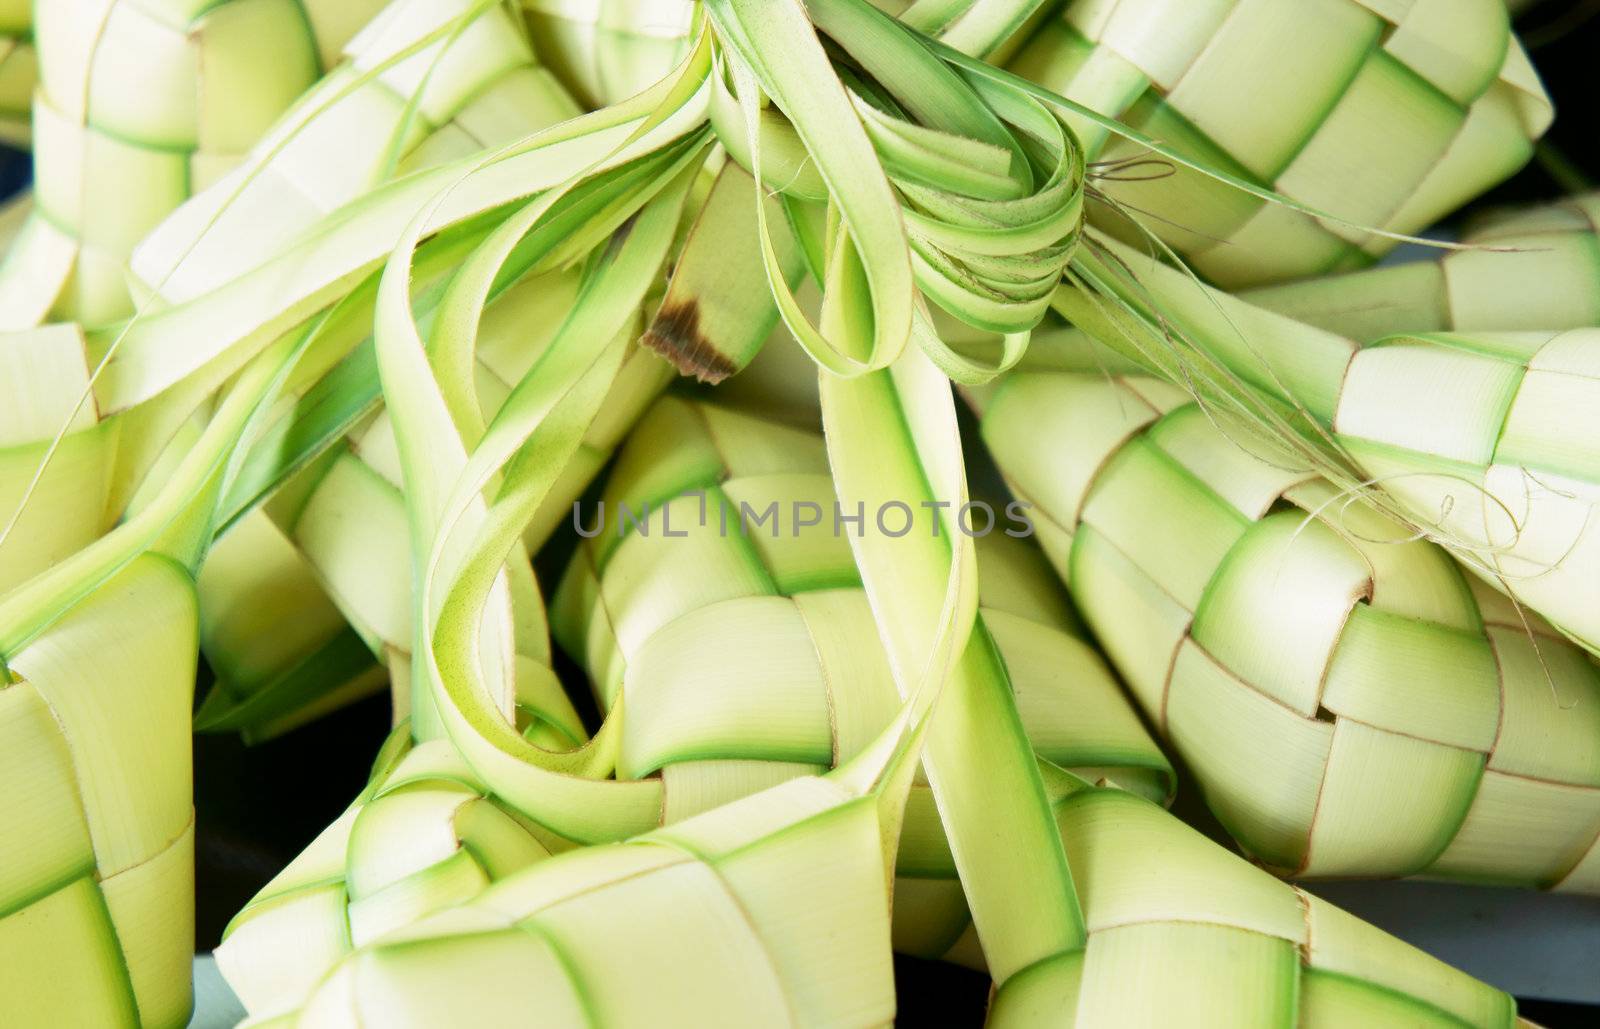 Ketupat: South East Asian rice cakes bundle, often prepared for festivities and celebratory occasions.                   